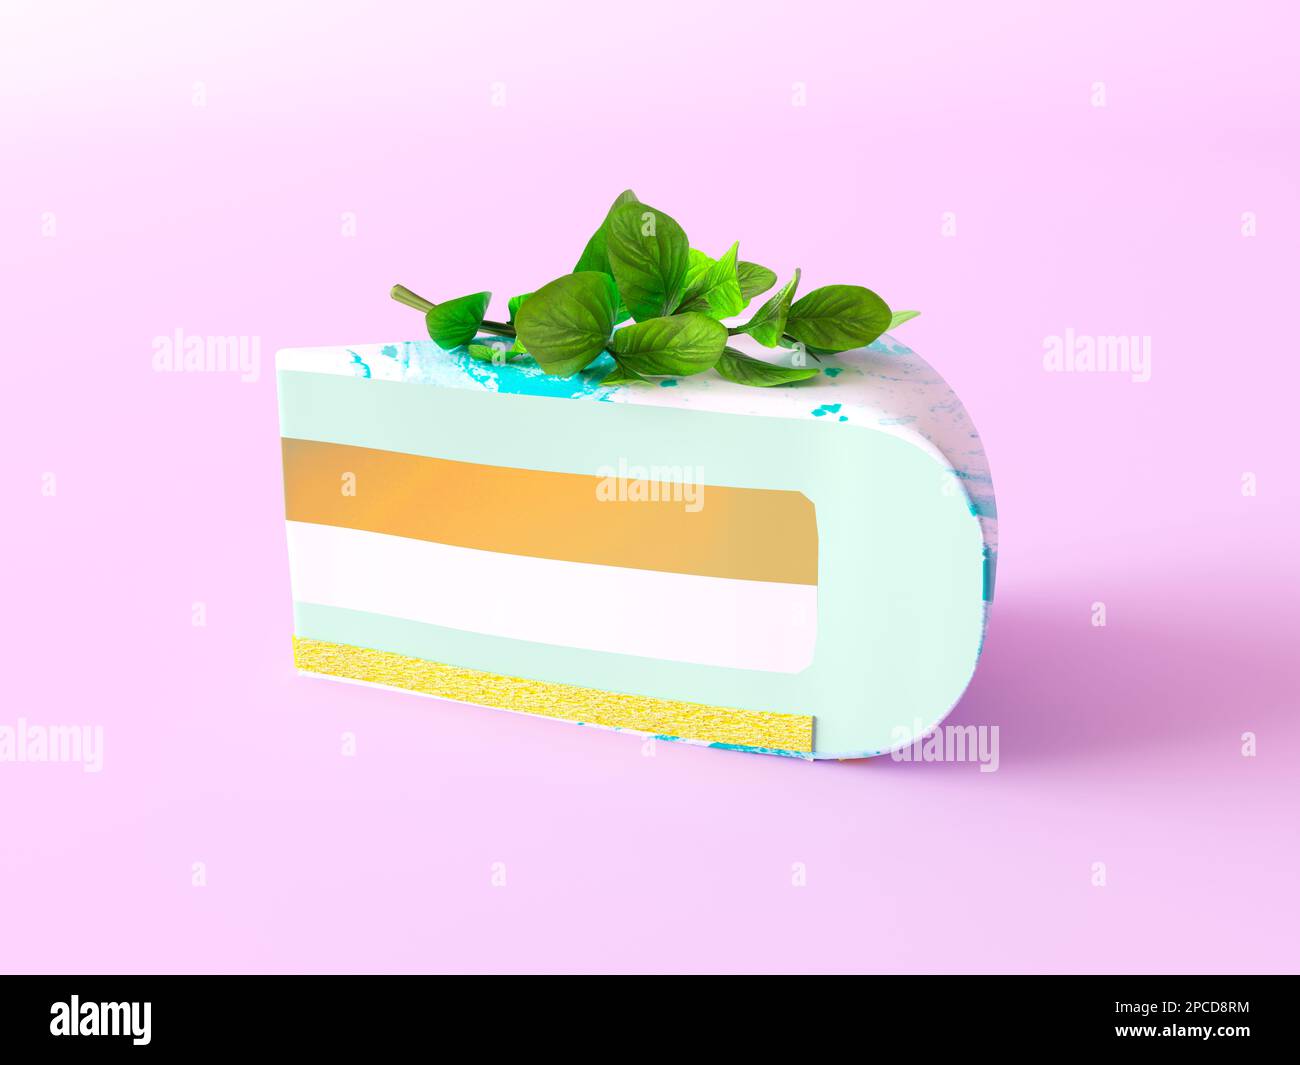 A piece of cake with mirror glaze. Mint icing, vanilla sponge, milk souffle and yellow jam in the filling. Decorated with green mint leaves. Stock Photo